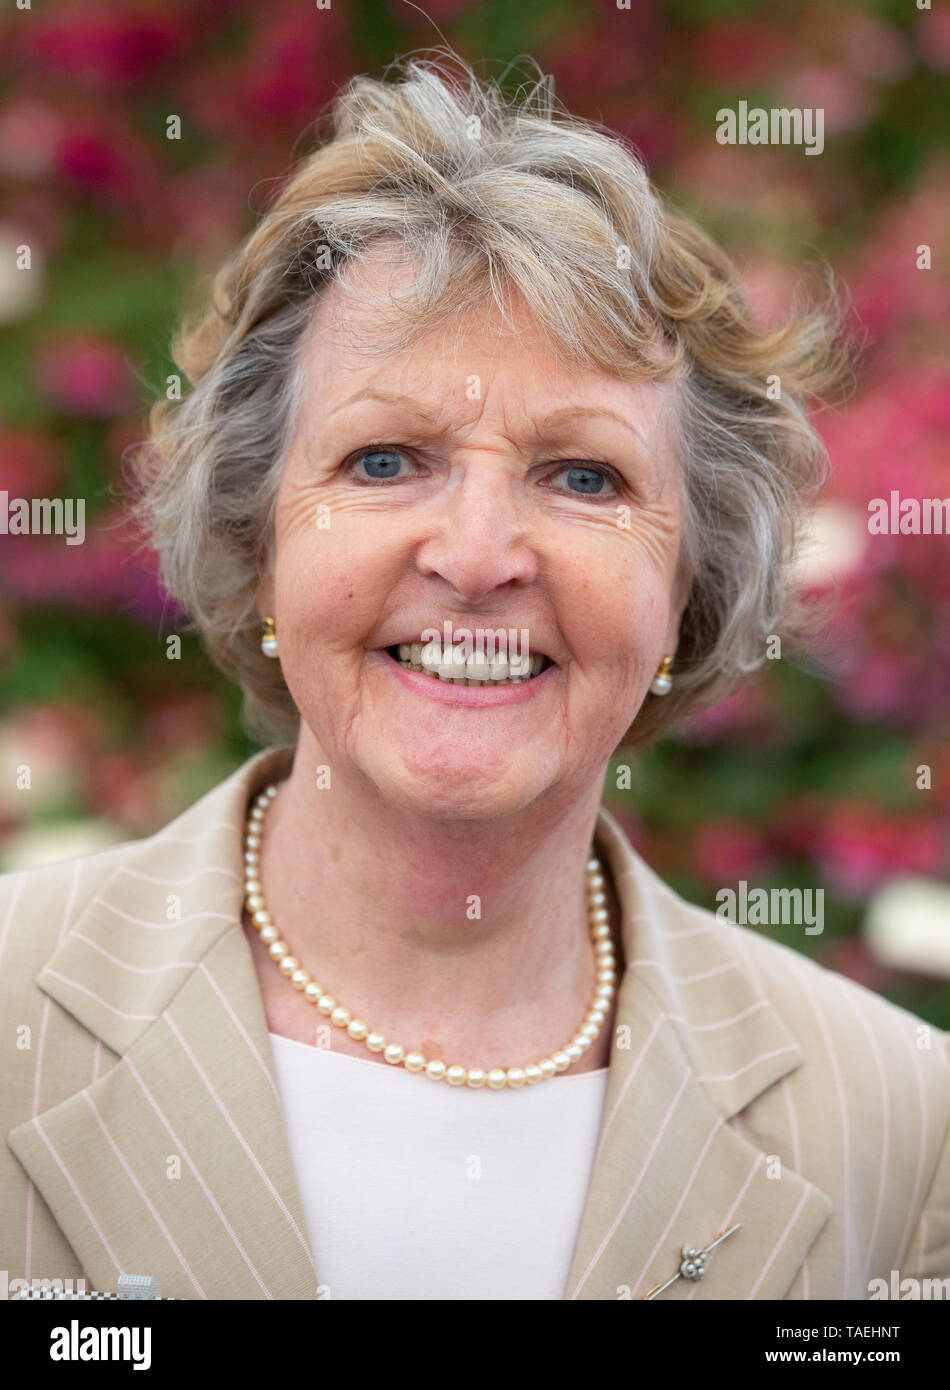 Stage and Television actress Penelope Keith at the RHS Chelsea Flower Show. She is best known for 'The Good Life' and 'To the Manor born'. Stock Photo